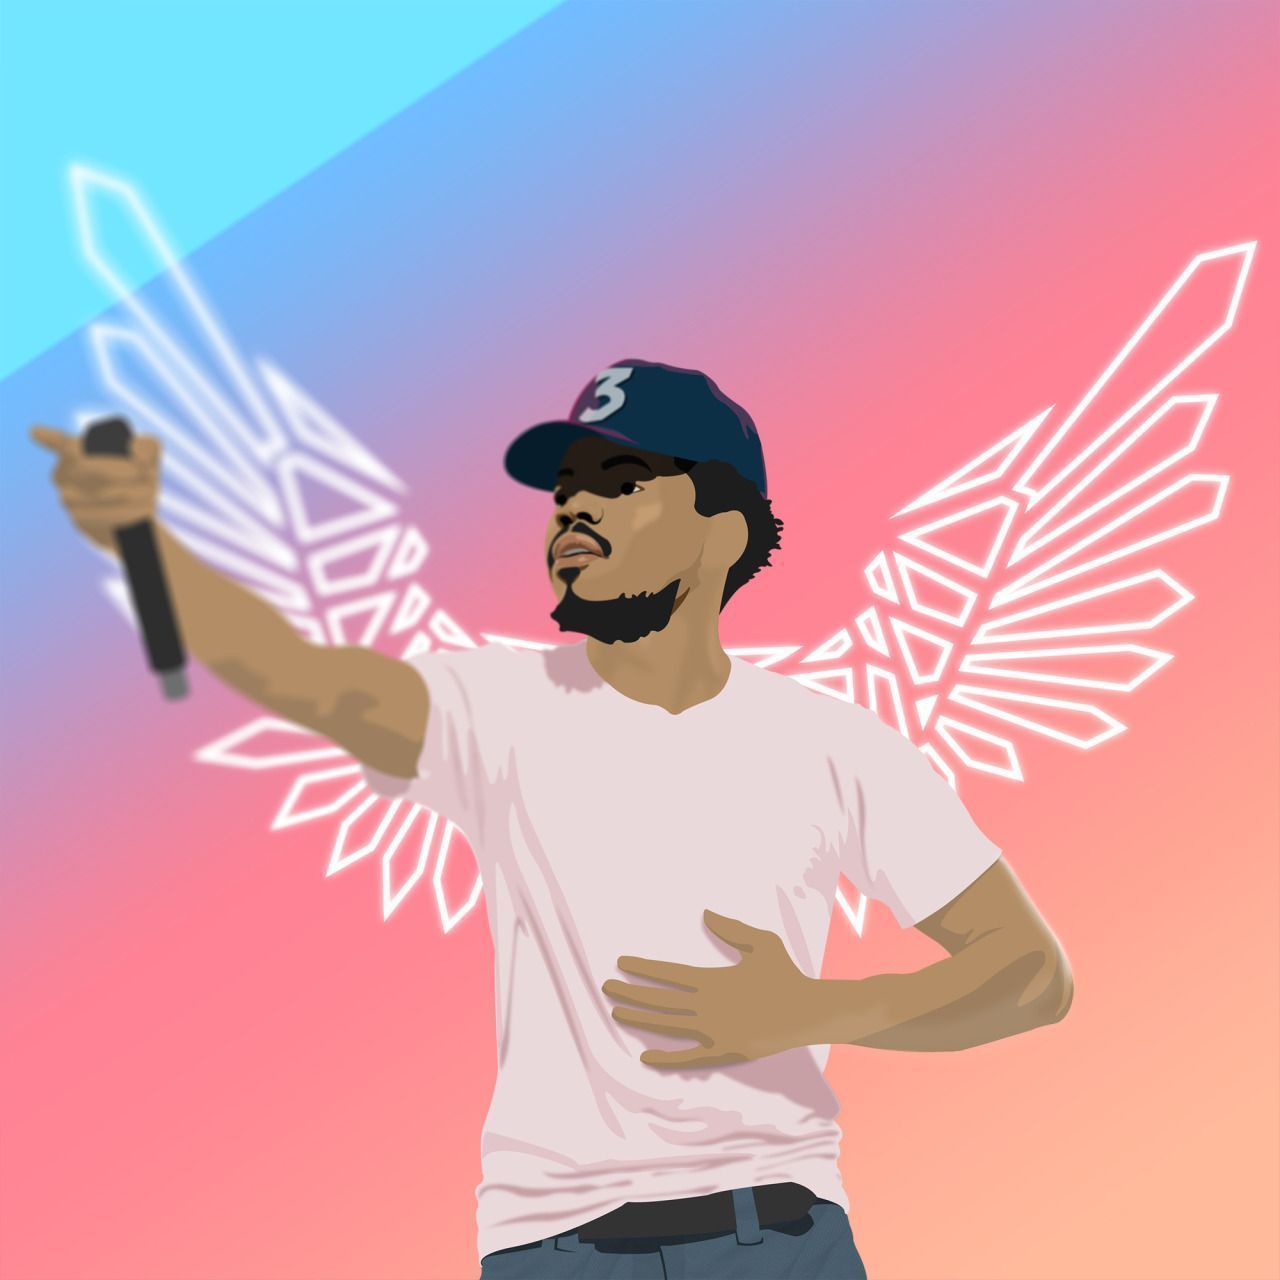 A digital illustration of Chance the Rapper with white wings behind him and a microphone in his hand. - Chance the Rapper